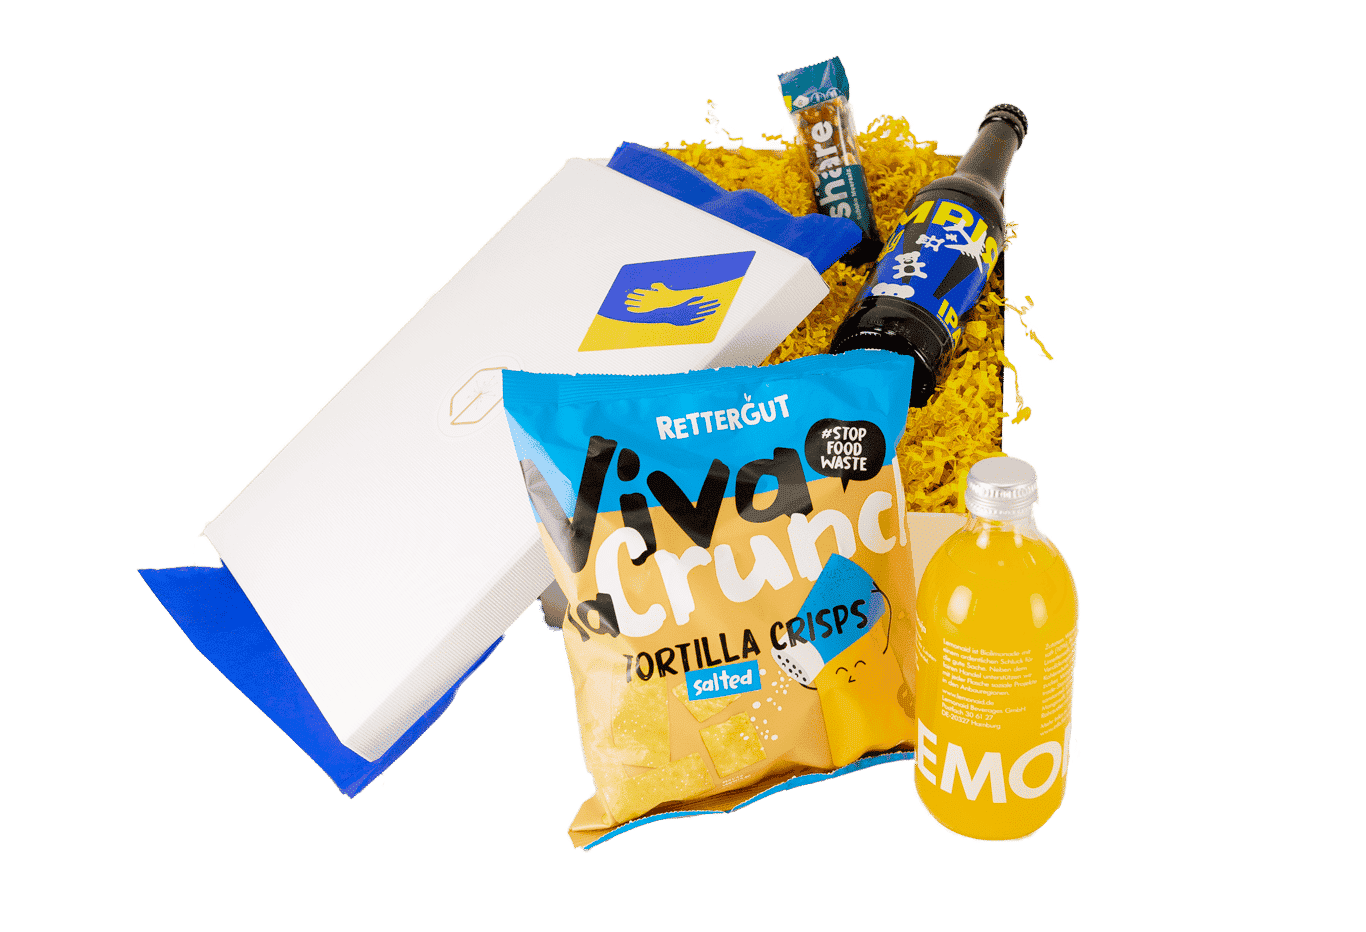 Support Ukraine with this box. Our profits are donated; and the box contains items from manufacturers who do the same*. Support UNO Refugee Aid and receive refreshing passion fruit lemonaid, sparkling BRŁO beer, a crunchy nut bar and delicious tortillas. *except: Tortilla chips